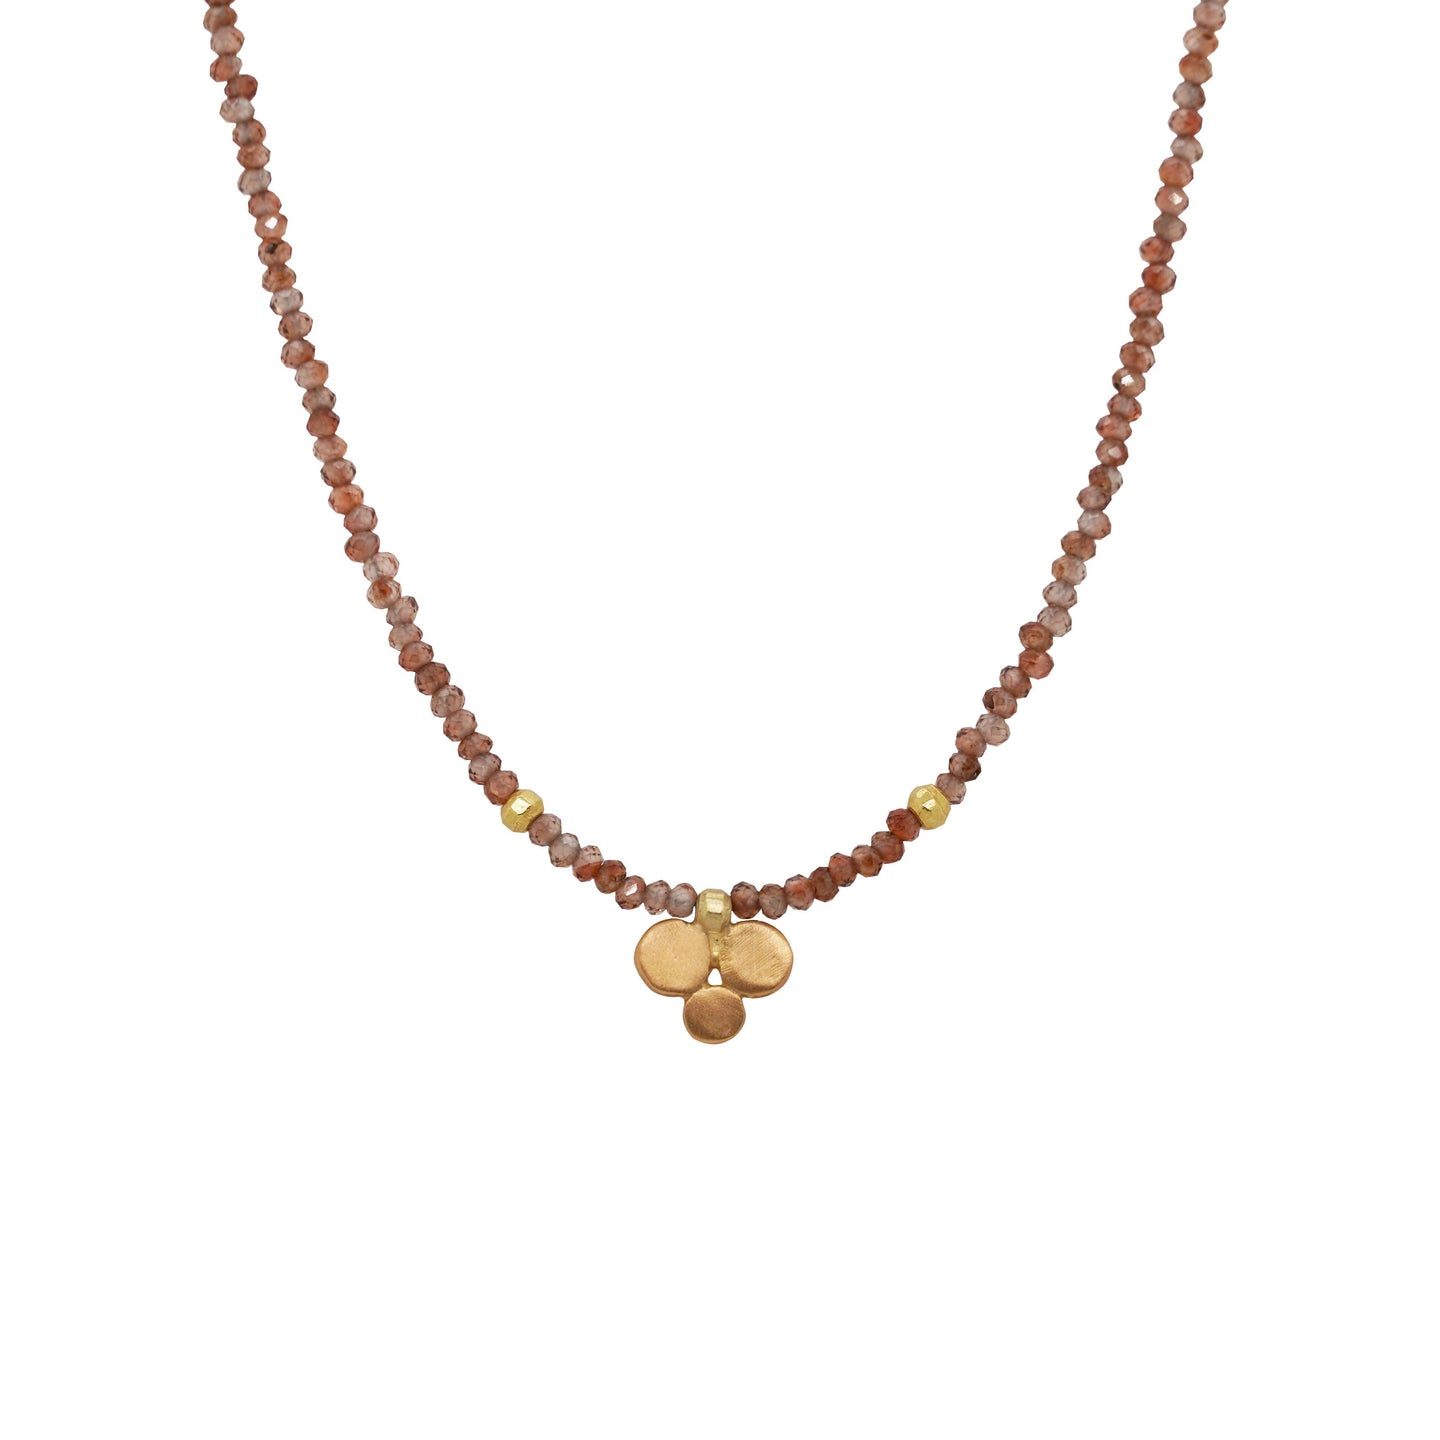 Brown Zircon Beaded Necklace with 22K Gold Charm